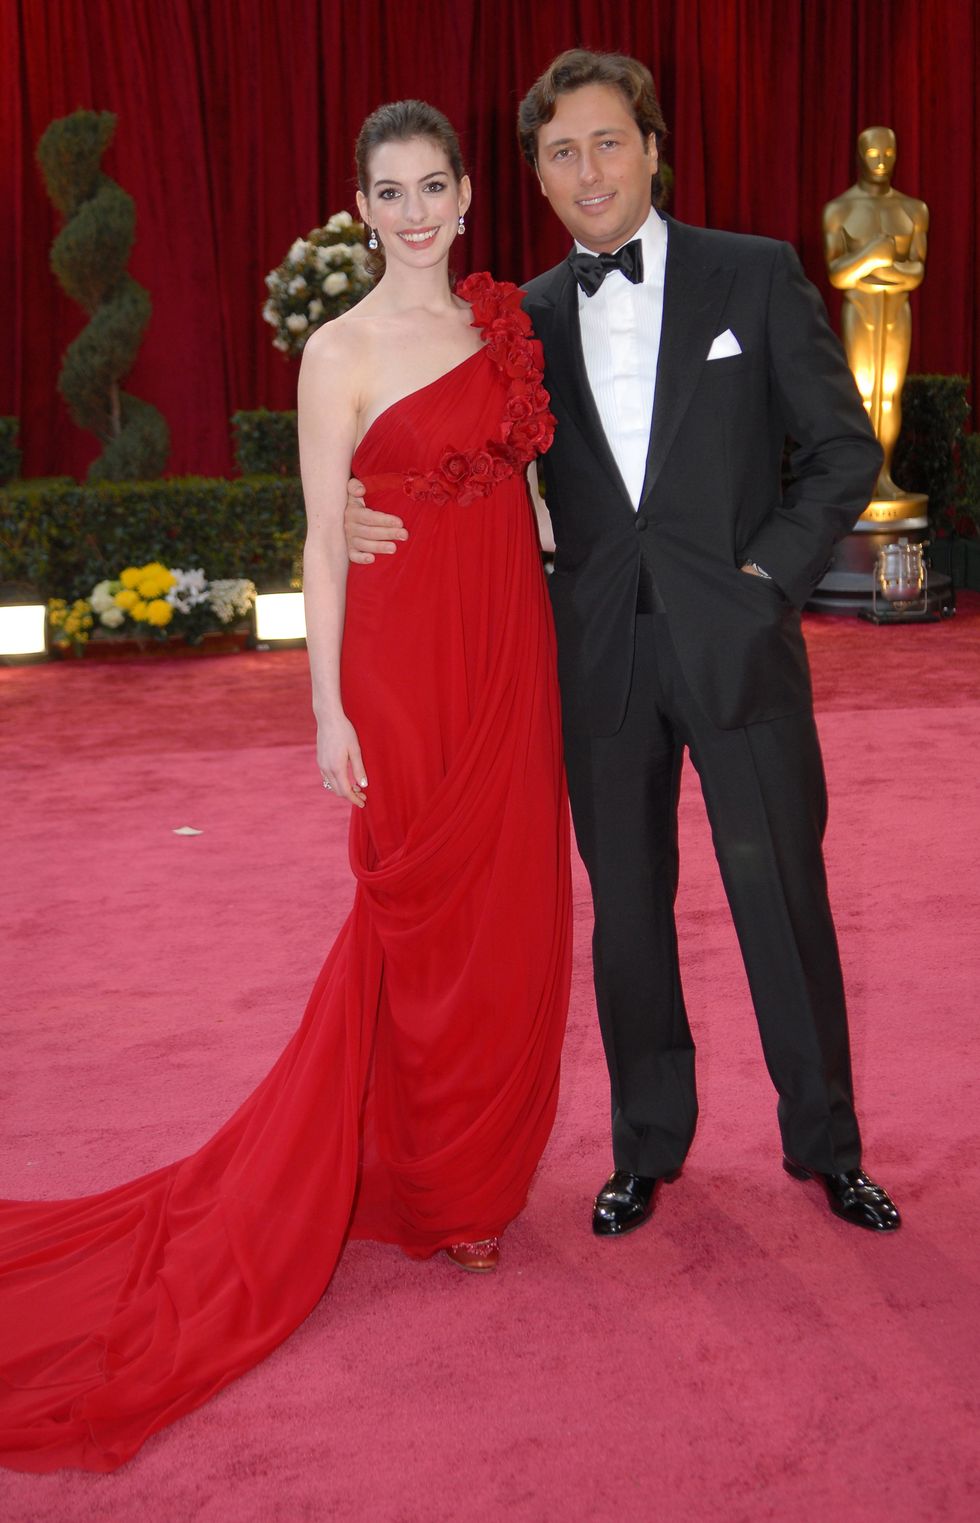 hollywood   february 24  anne hathaway and raffaello follieri arrives at the 80th annual academy awards at the kodak theatre on february 24, 2008 in los angeles, california  photo by bob riha jrwireimage